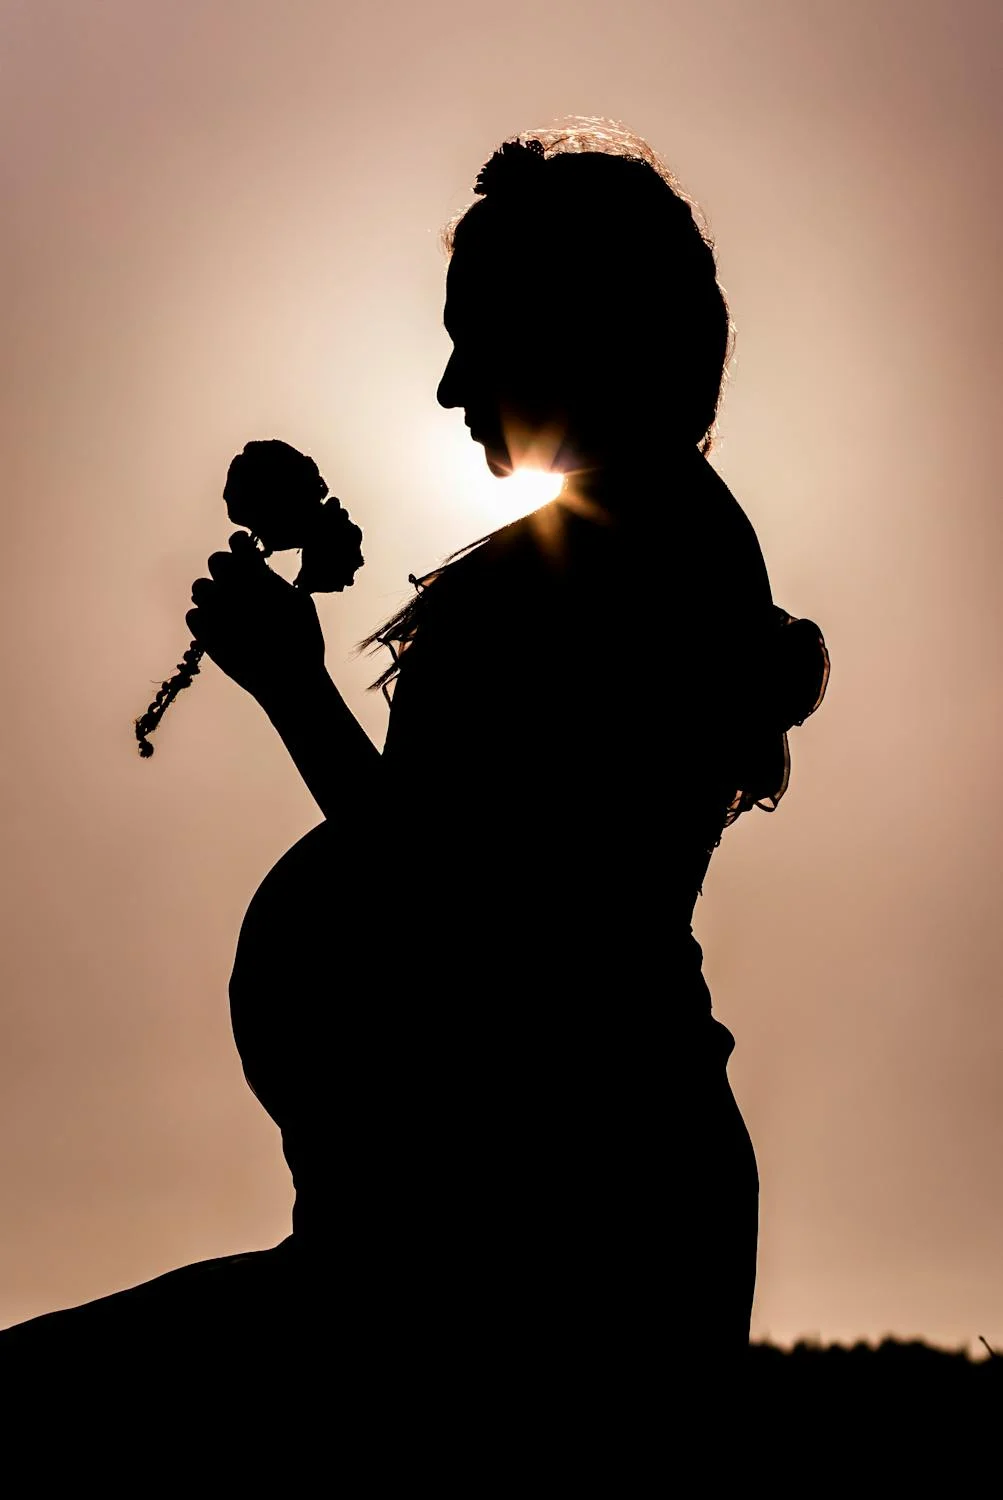 A silhouette of a pregnant woman holding flowers during sunset | Source: Pexels